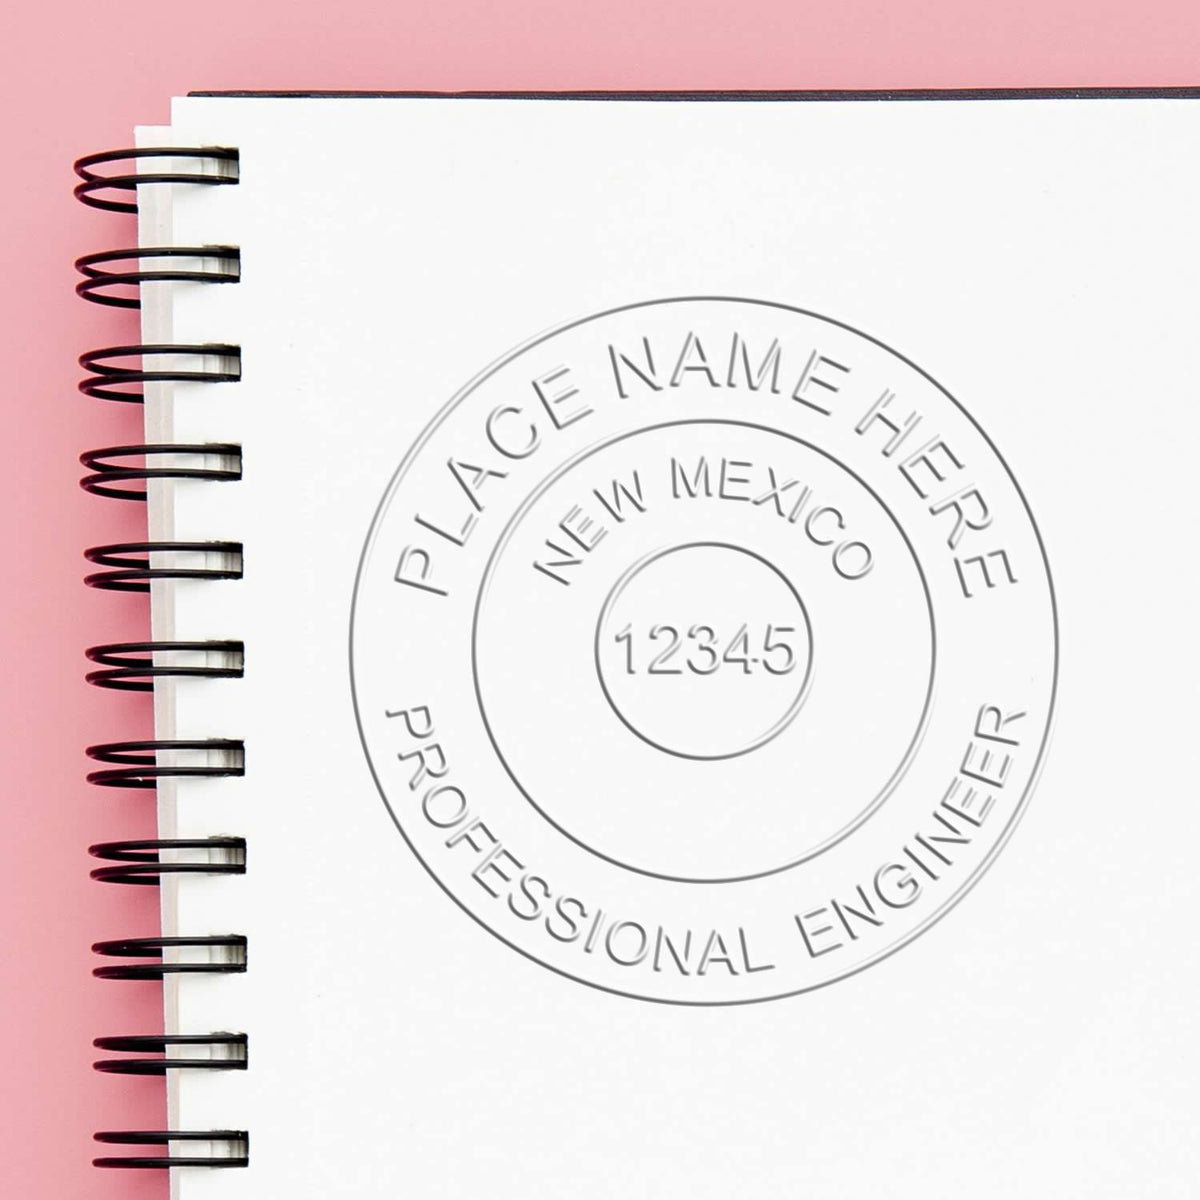 A stamped impression of the Soft New Mexico Professional Engineer Seal in this stylish lifestyle photo, setting the tone for a unique and personalized product.